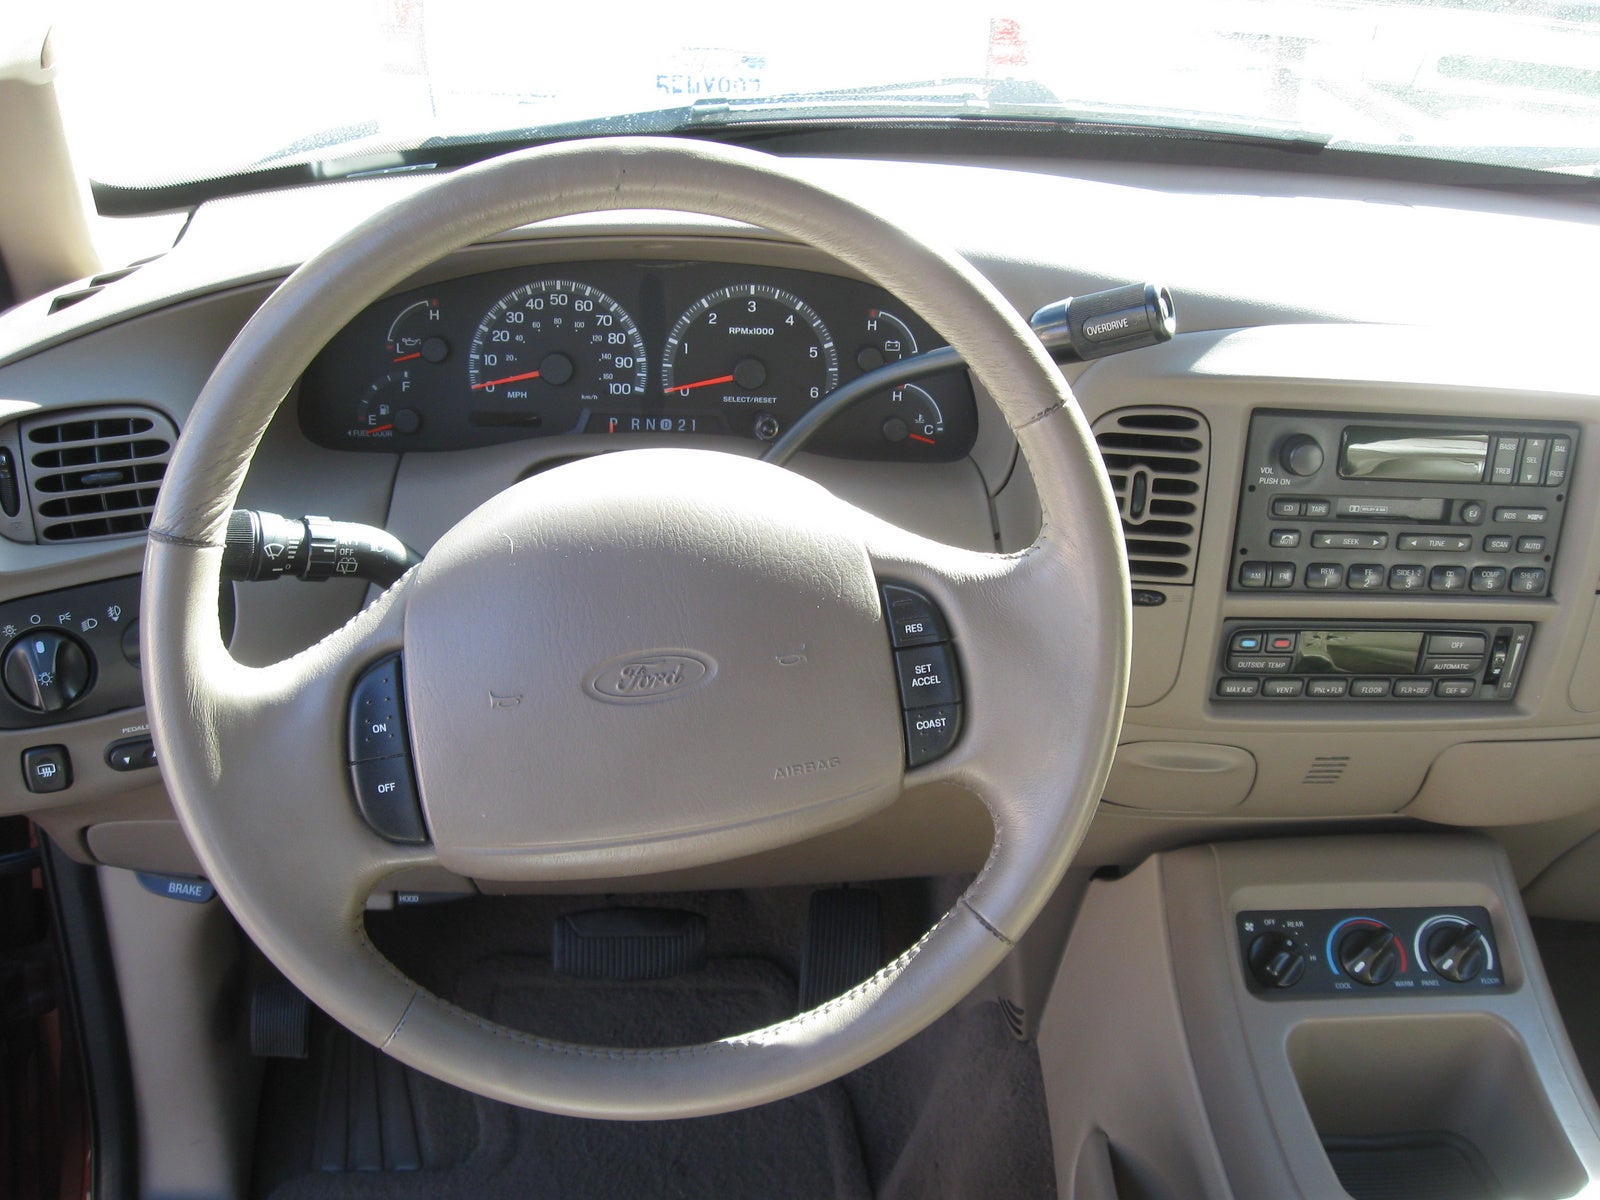 2000 Ford expedition interior photos #2